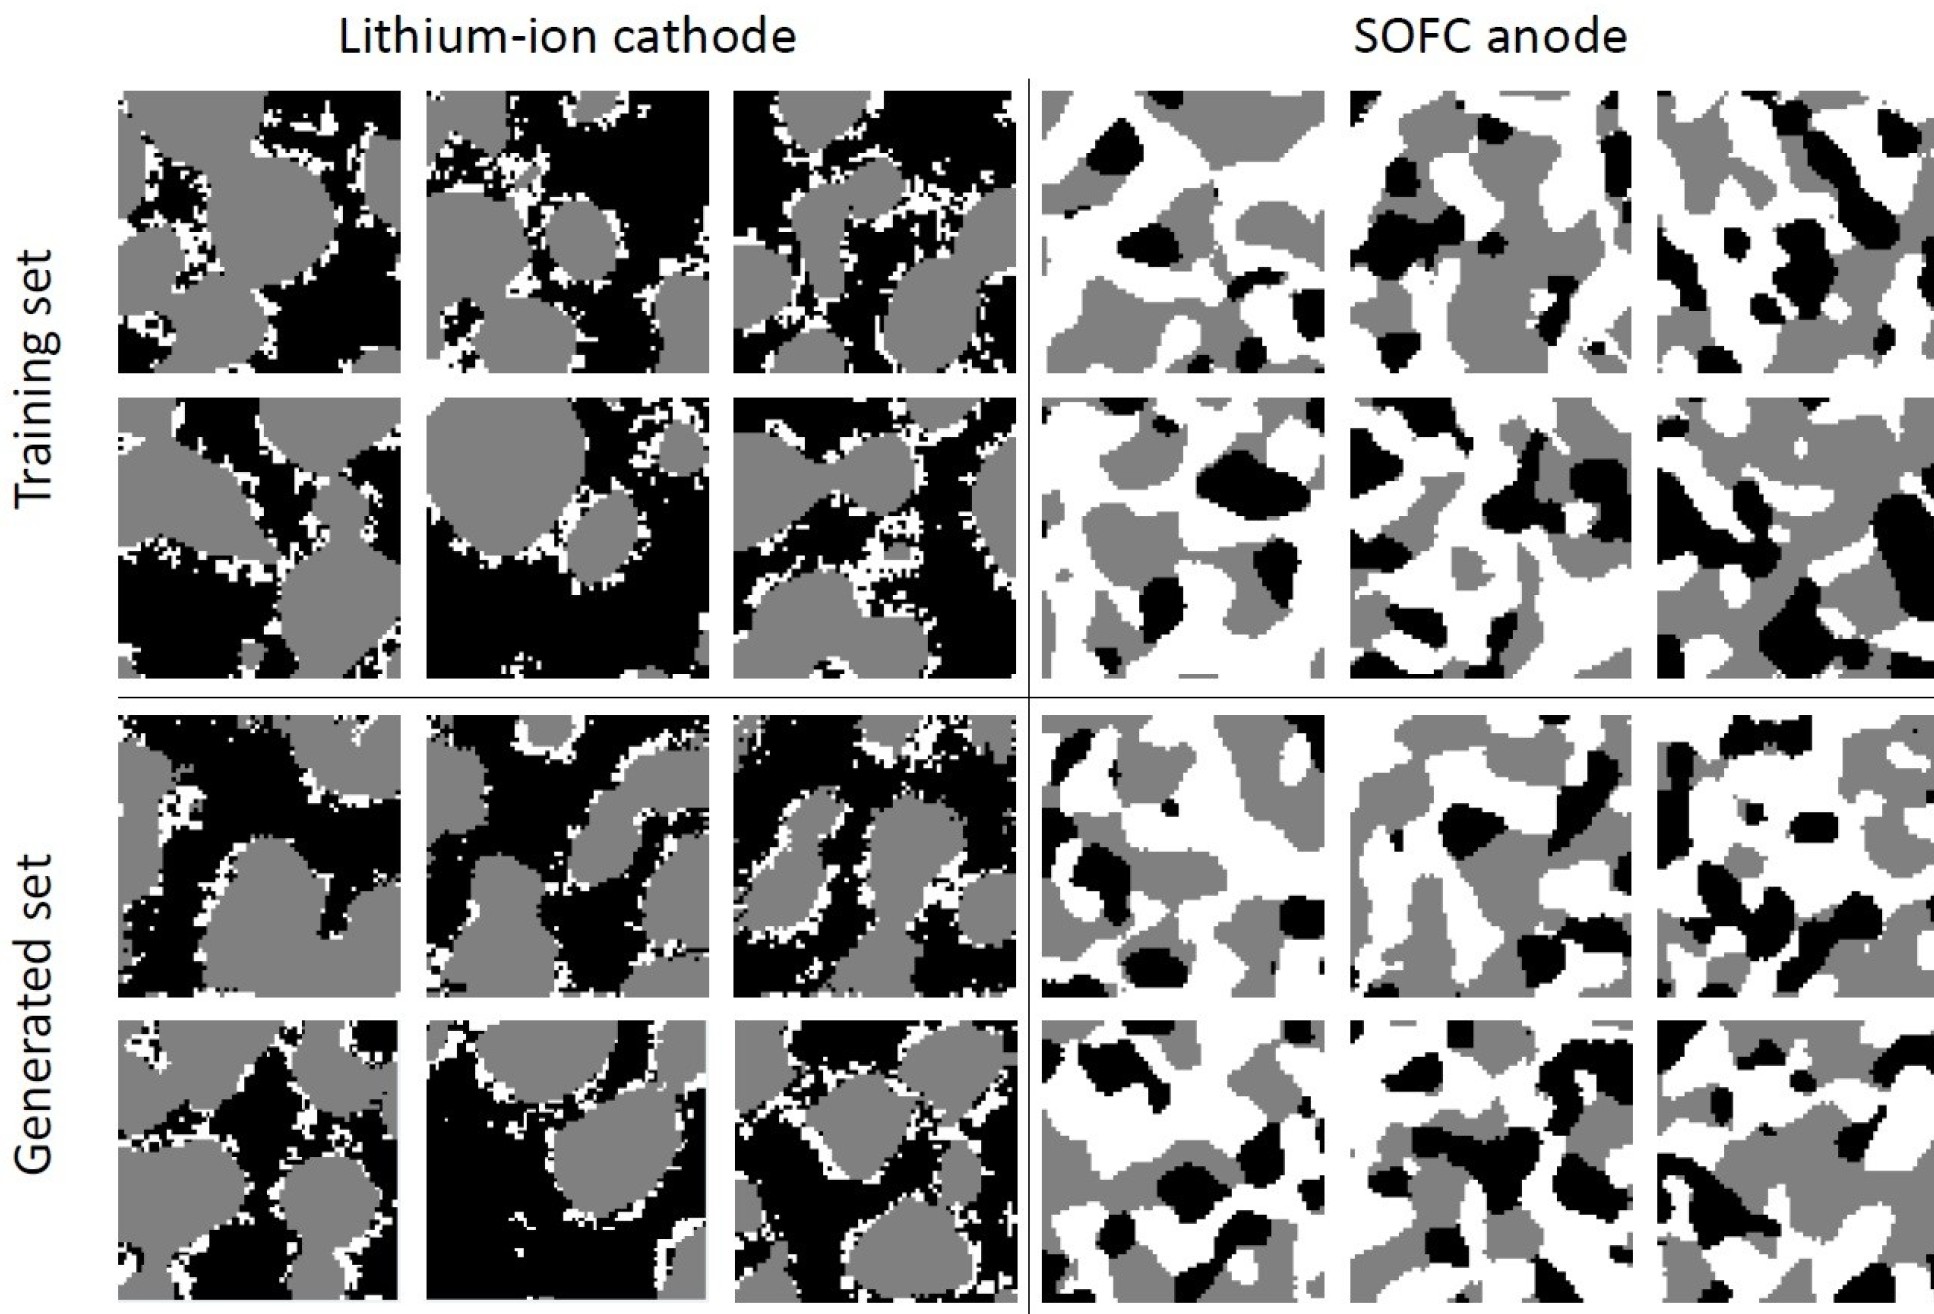 Images from both the cathode and anode samples which show the real and the algorithm-generated microstructures.